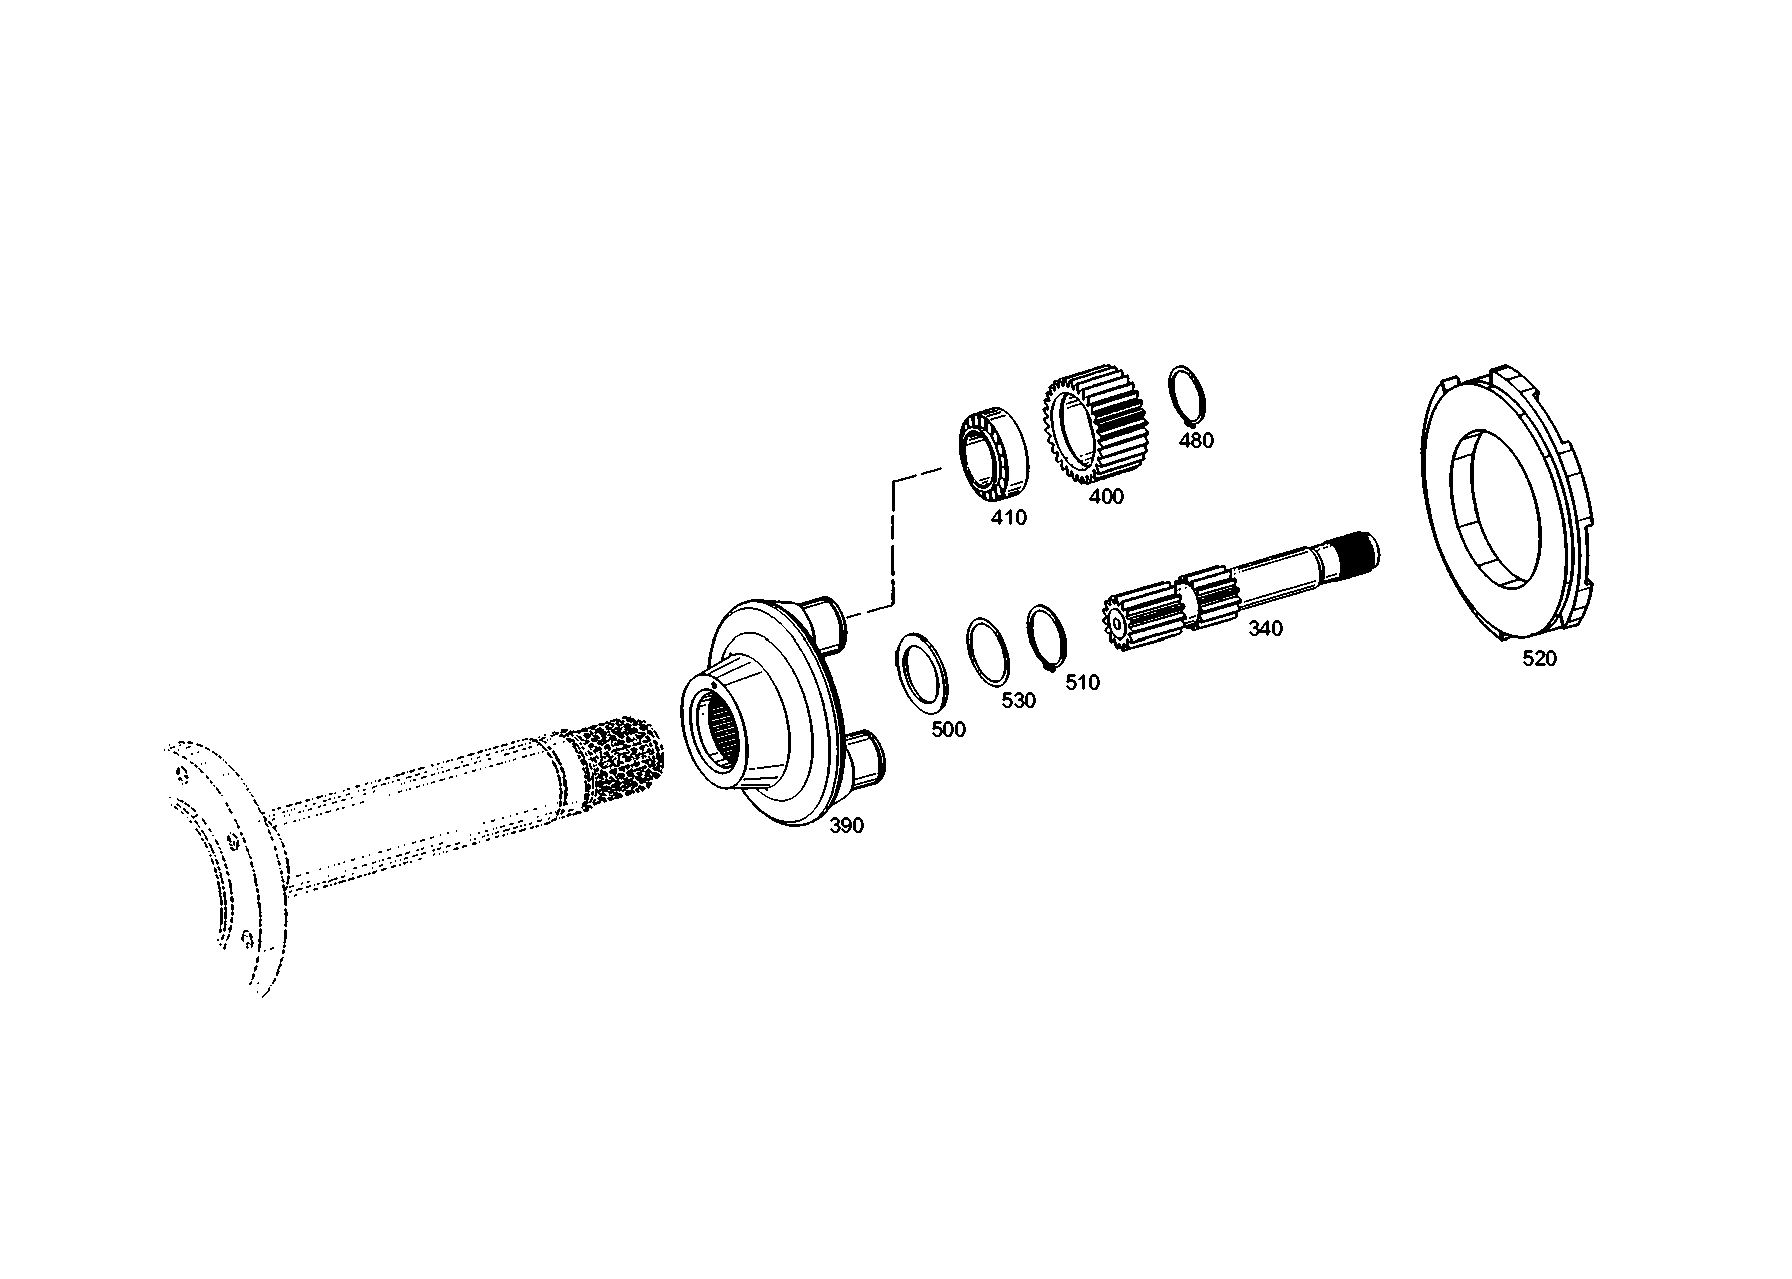 drawing for HAMM AG 1282395 - WASHER (figure 4)